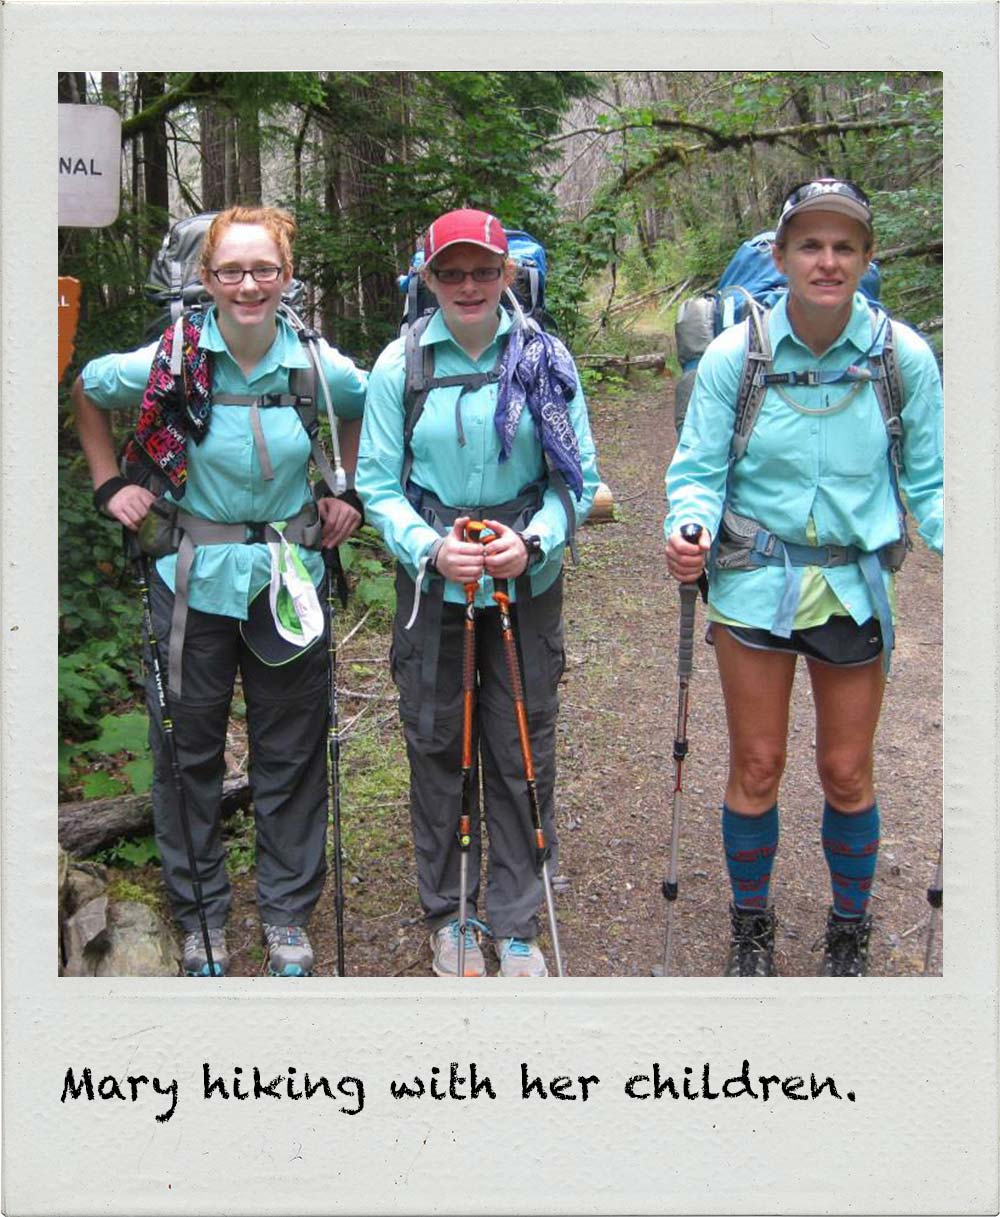 Mary hiking with her children.